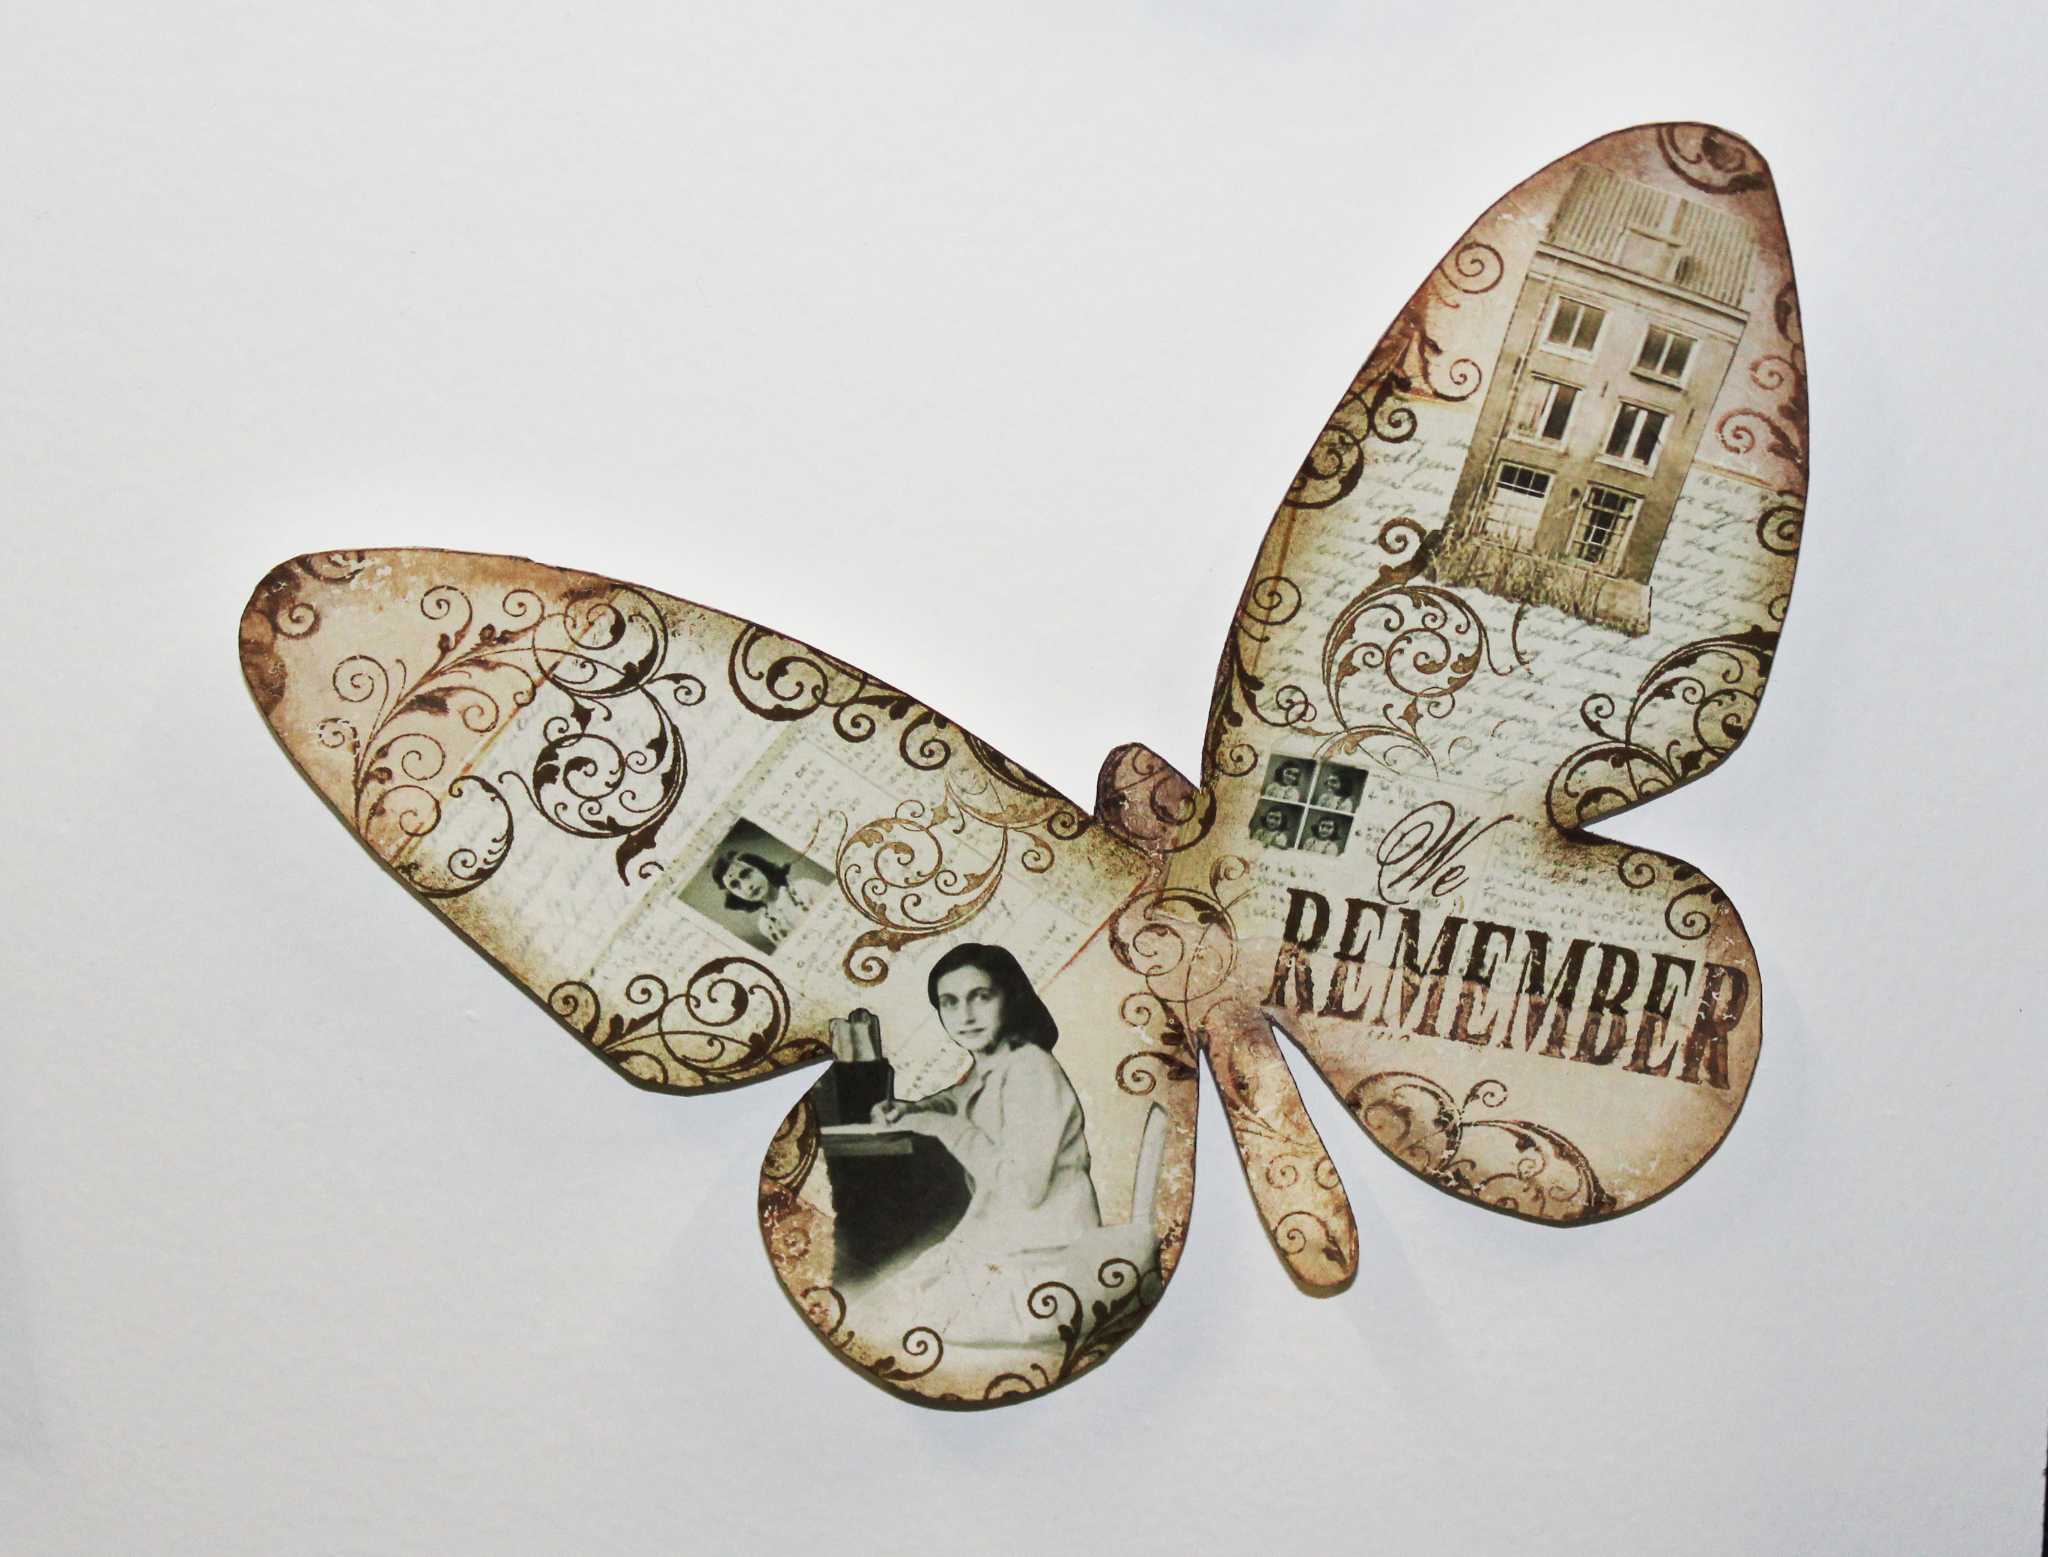 Holocaust Museum Houston's "Butterfly Project" now